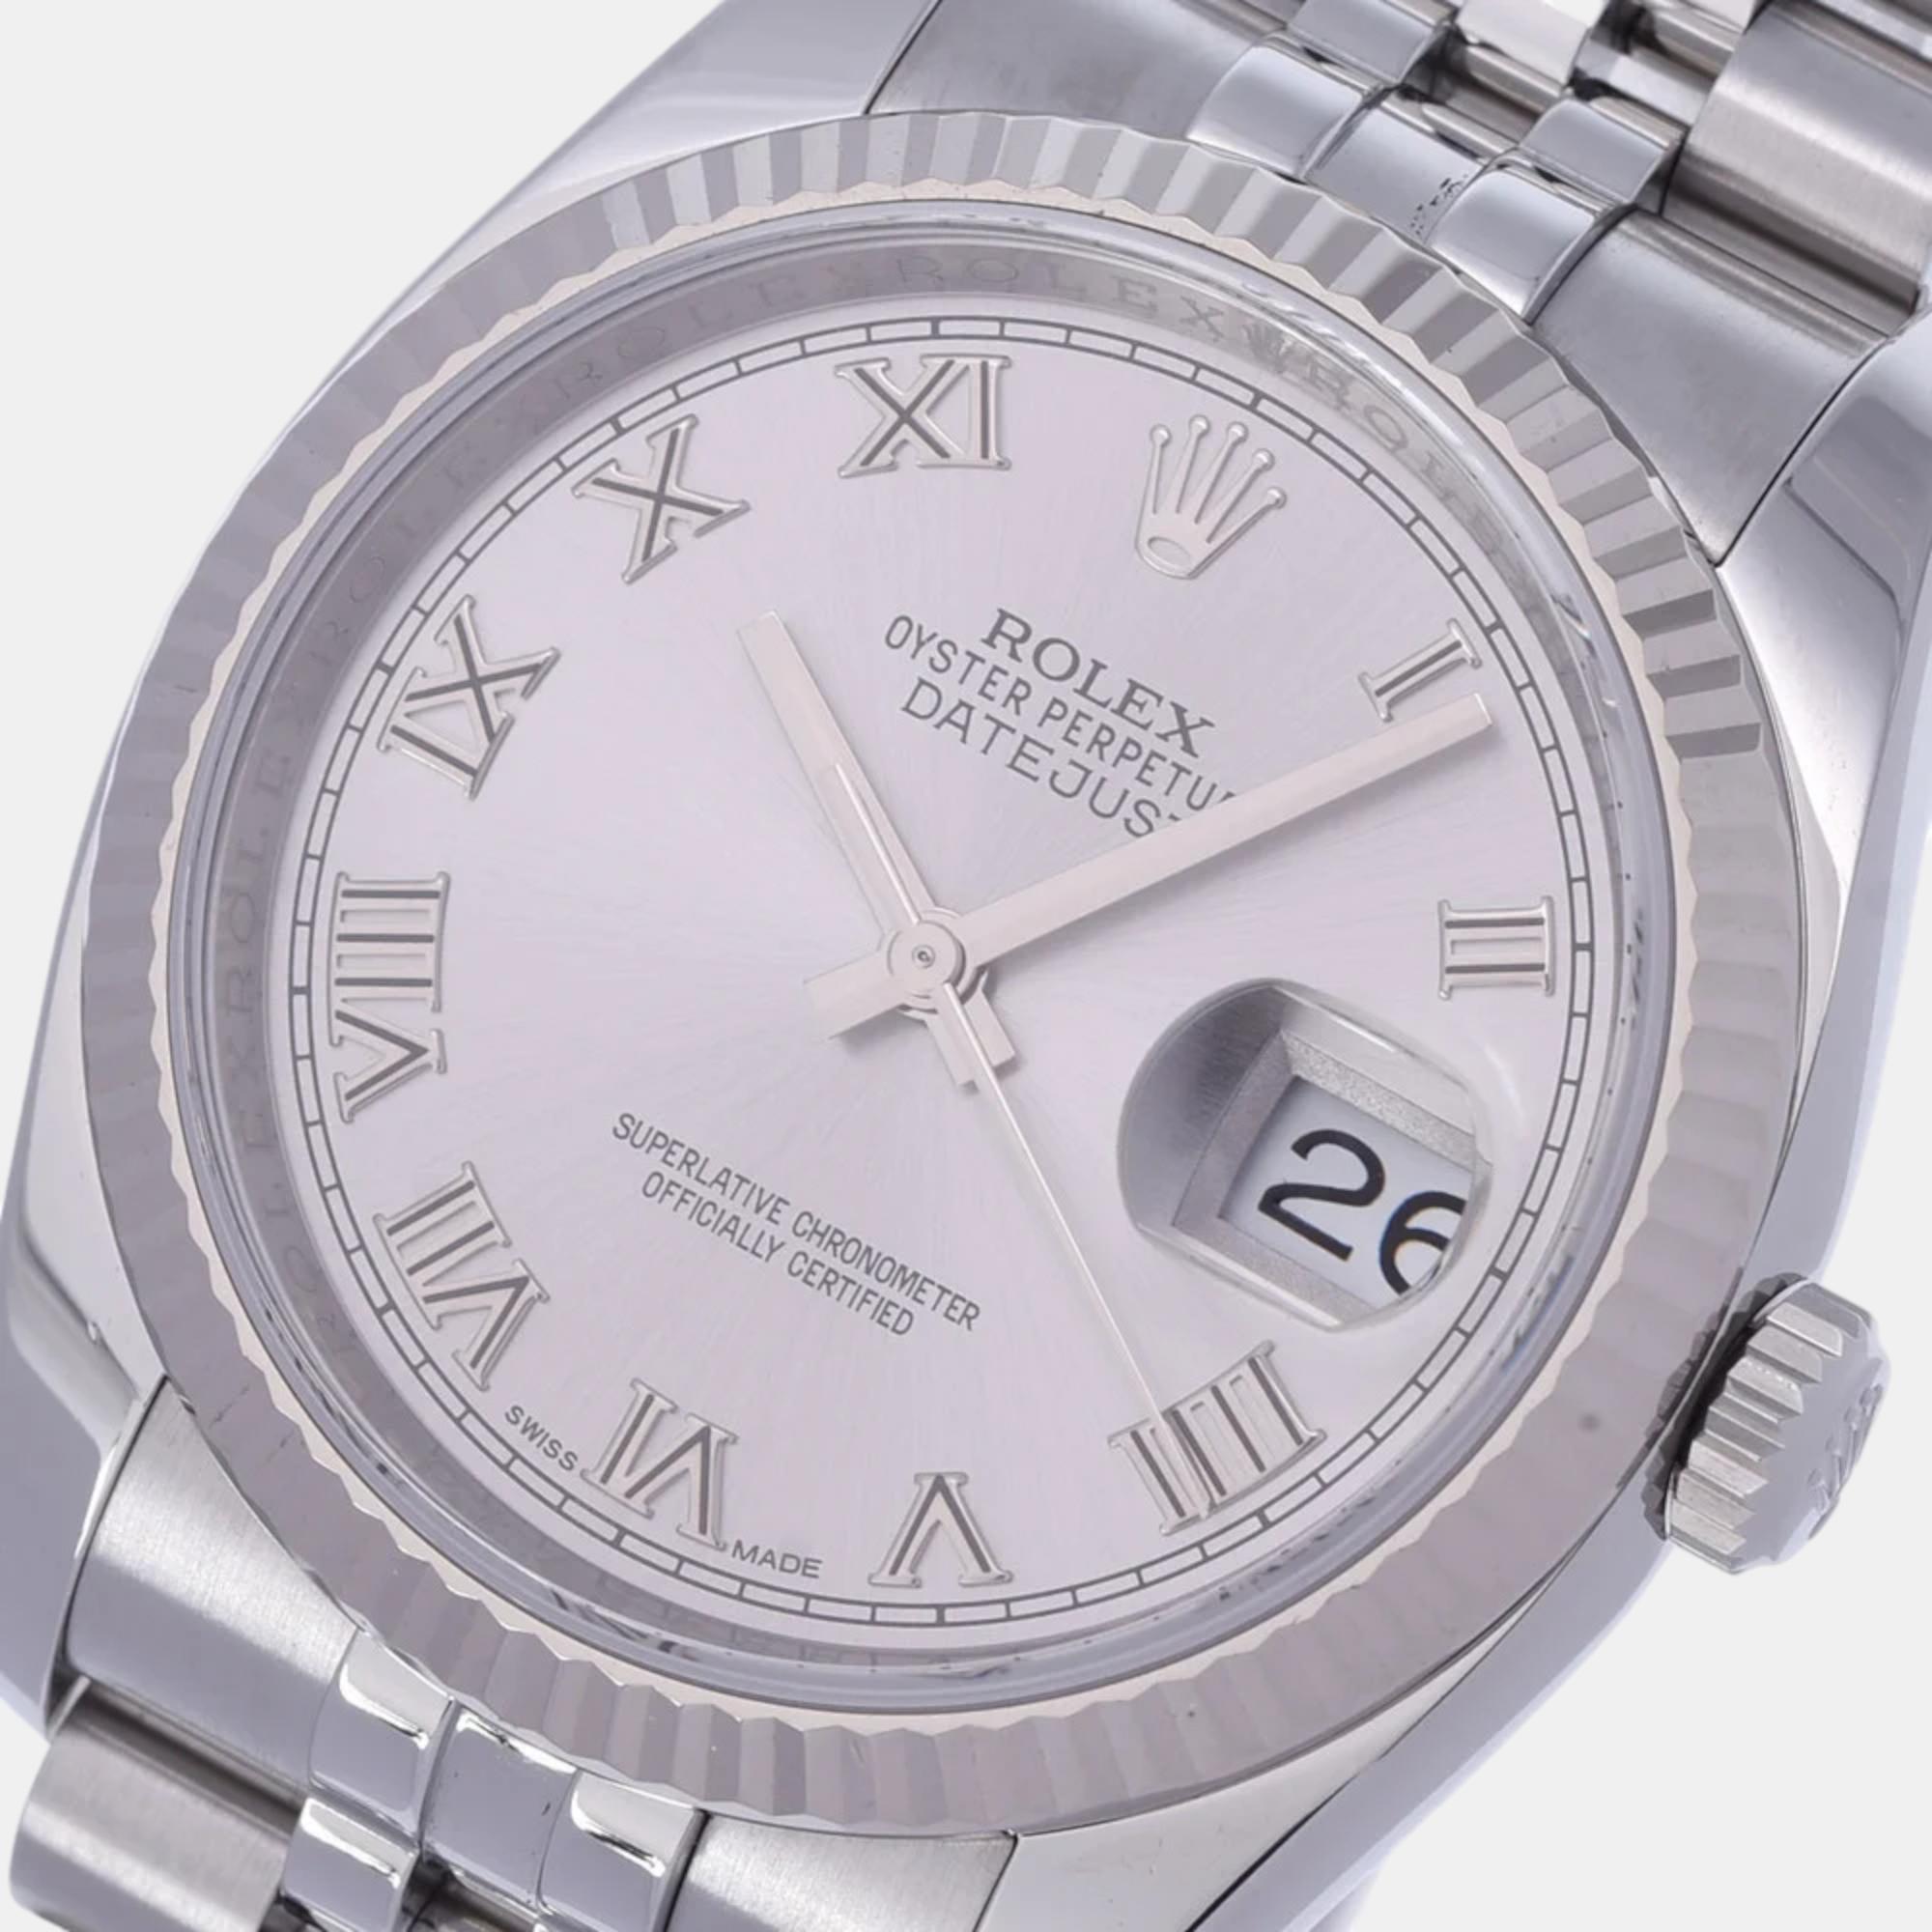 

Rolex Silver Stainless Steel Datejust 116234 Automatic Men's Wristwatch 36 mm